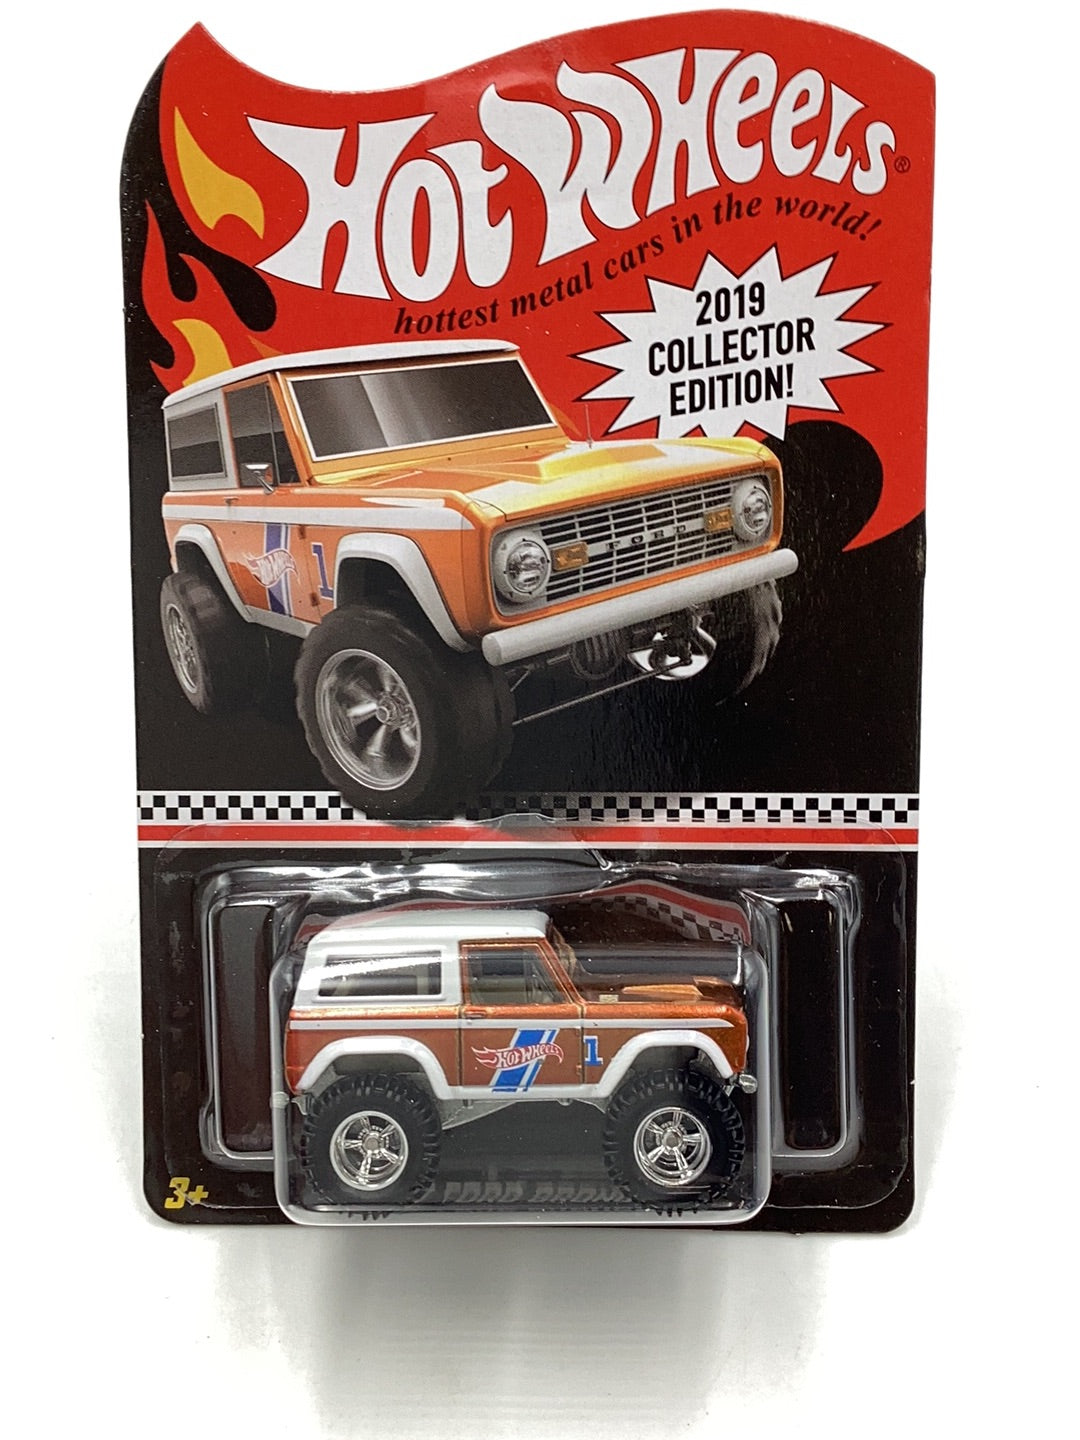 Hot wheels 2019 mail in collectors edition 67 Ford Bronco